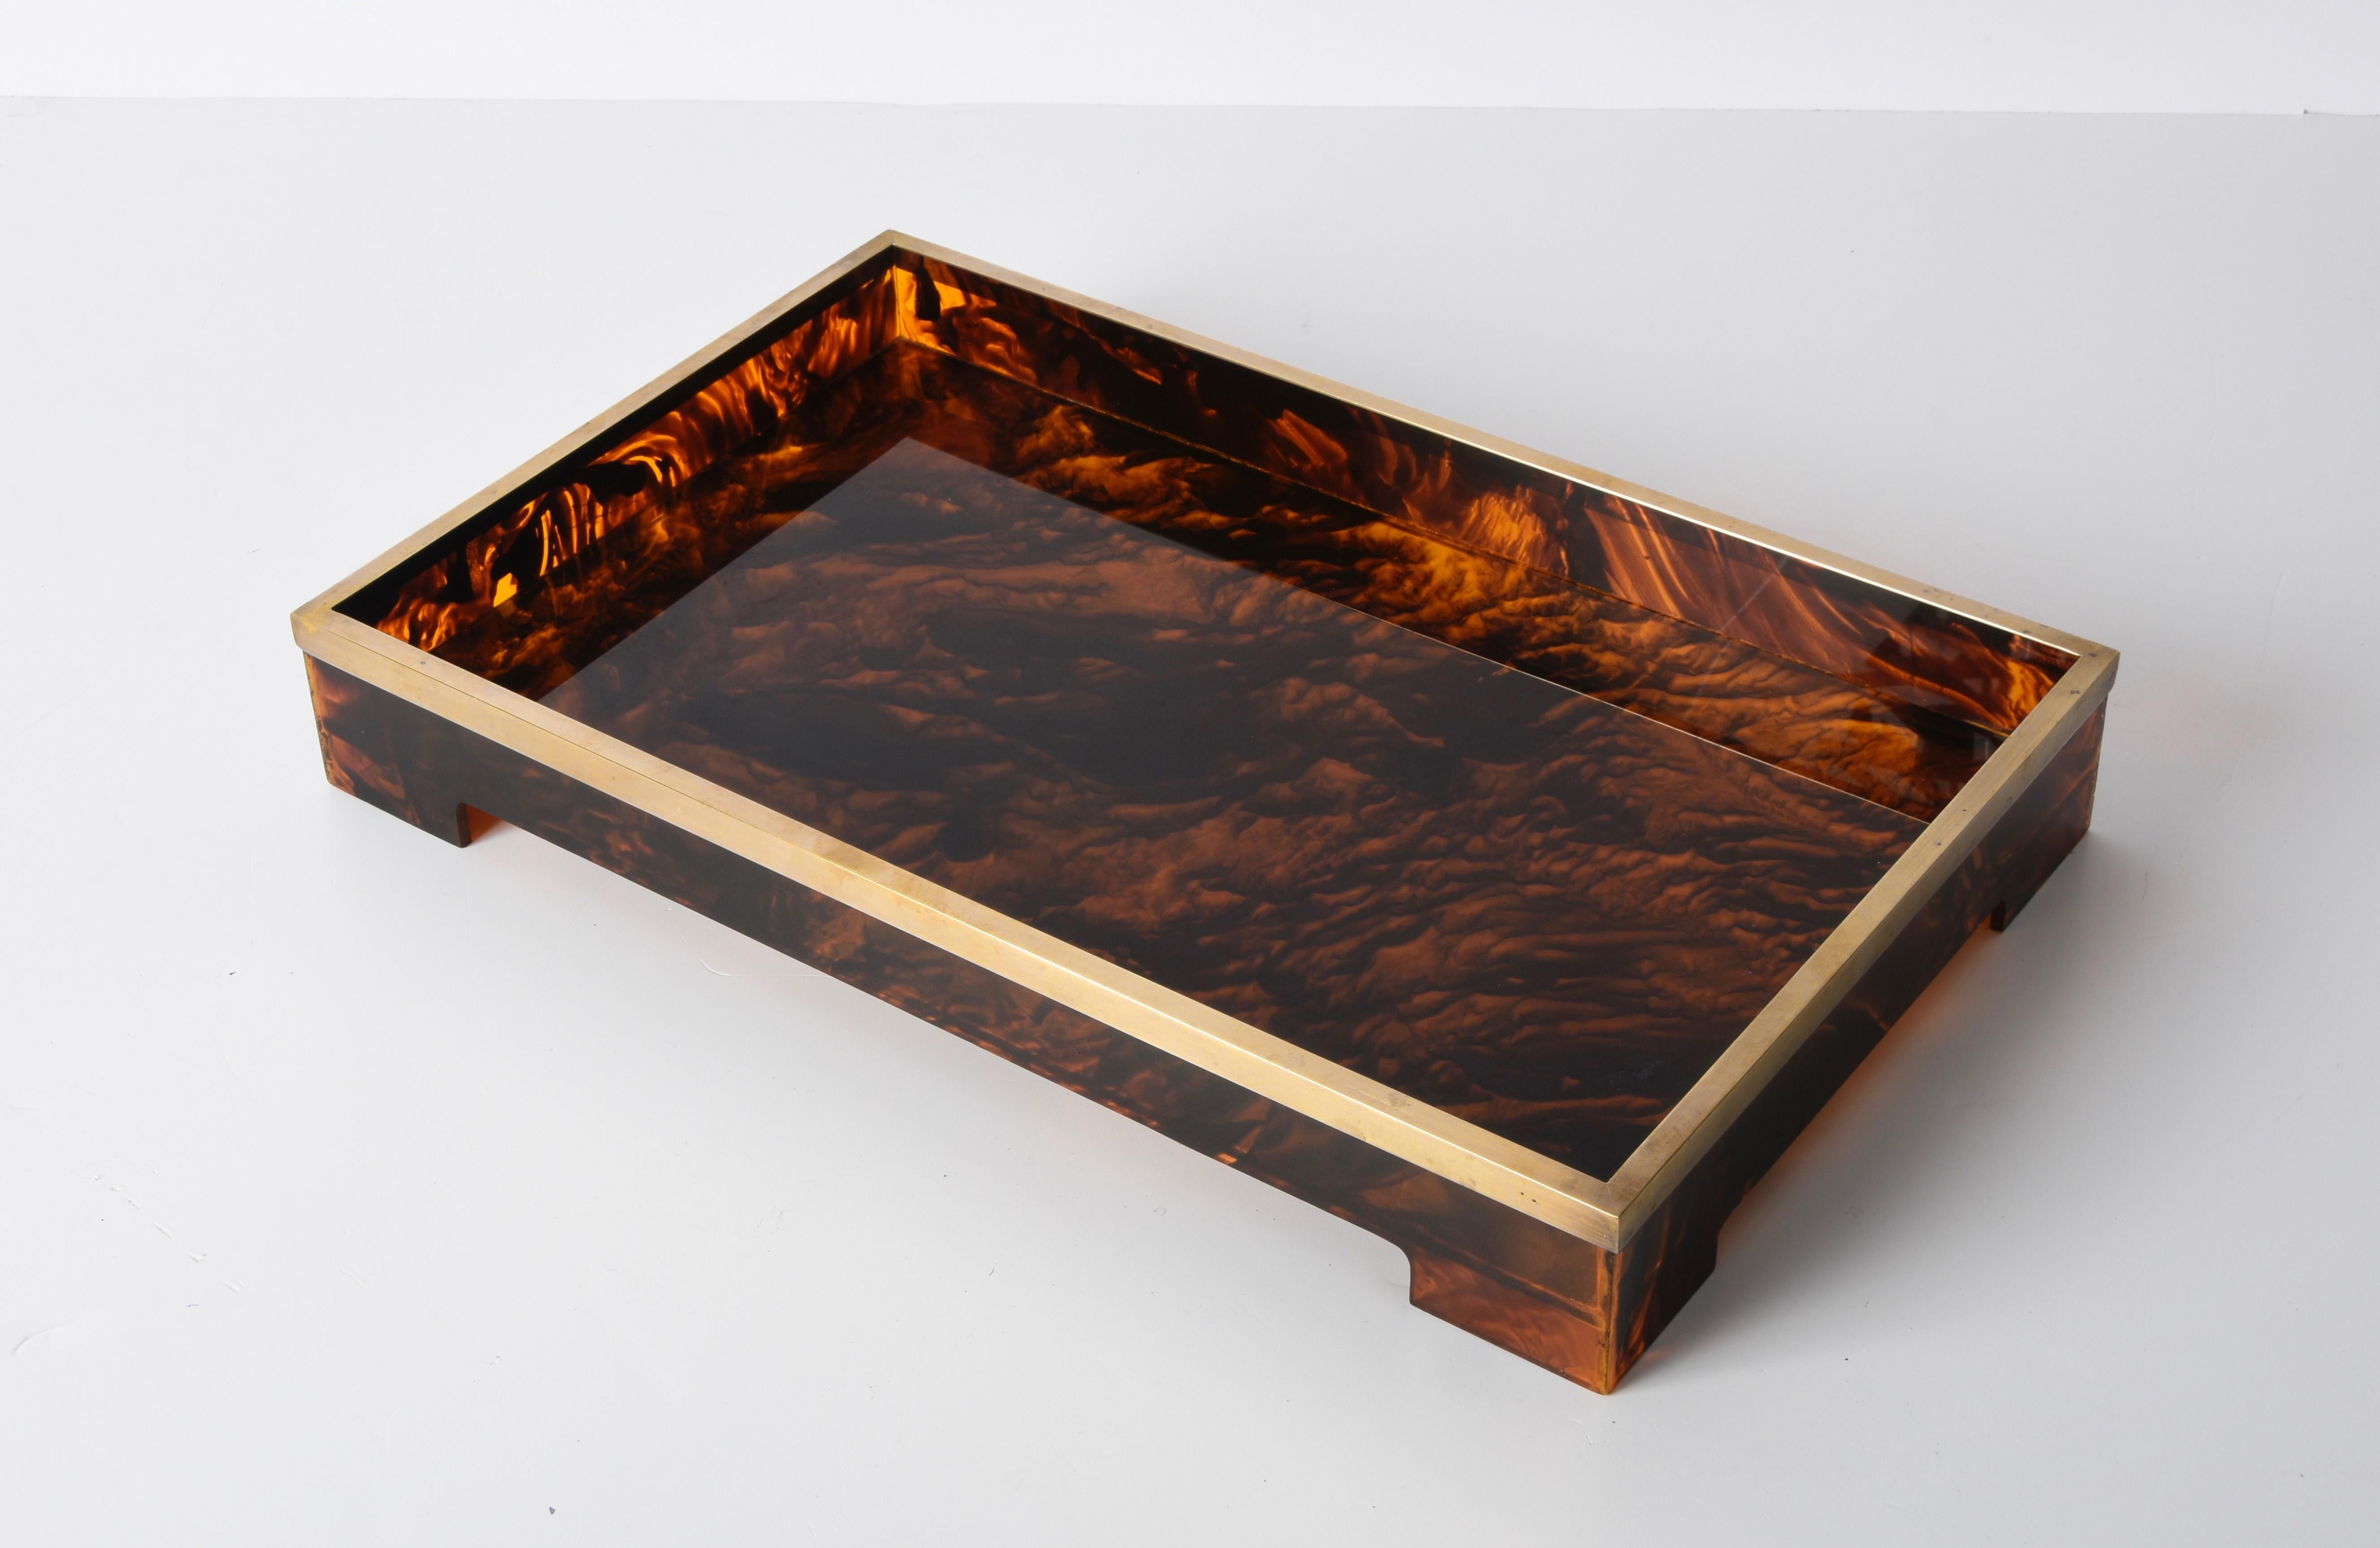 Astonishing midcentury tortoiseshell Lucite and brass serving tray. This incredible piece was produced in Italy during the 1970s and its design is attributed to Willy Rizzo.

A real iconic tortoise and Lucite serving tray with the characteristics